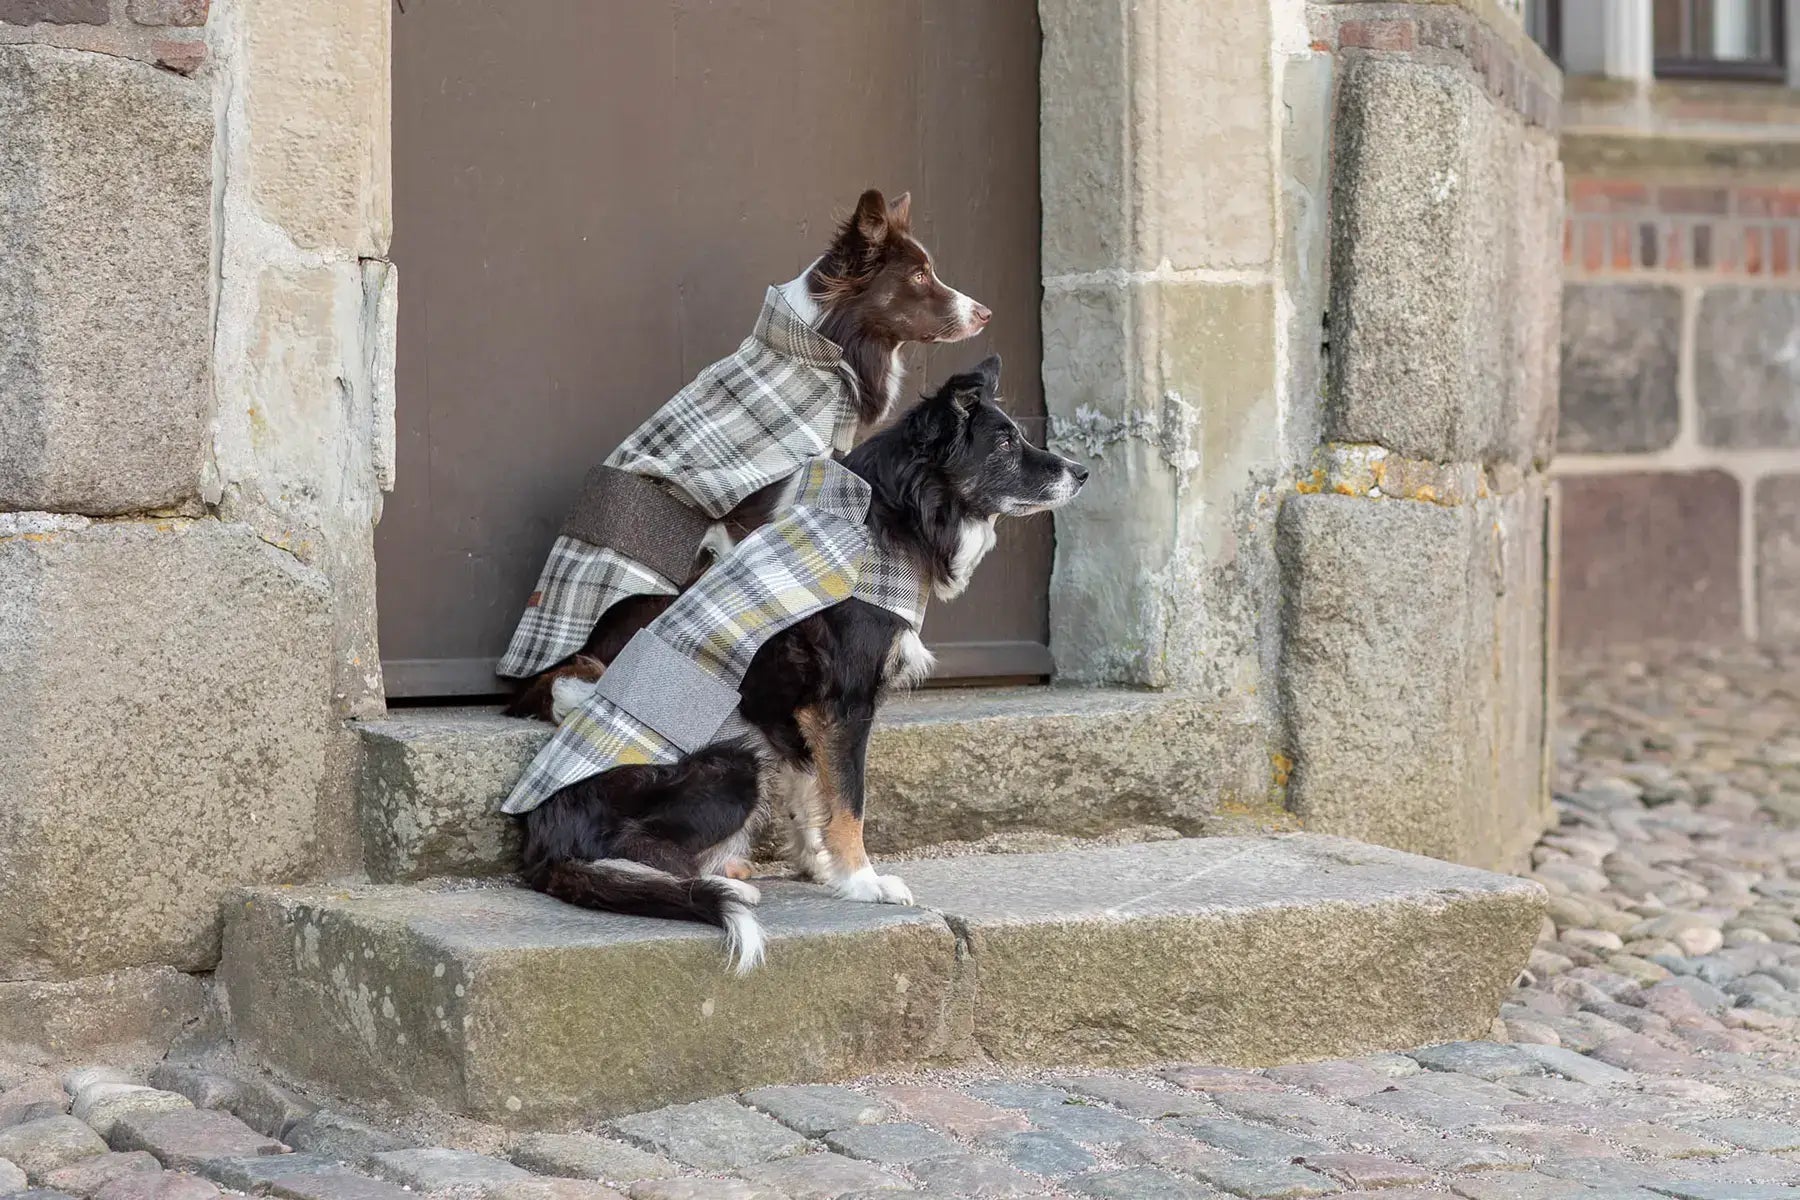 Two Bowl&Bone Republic dog coats in a LEAF brown shade sitting on the steps of a building.